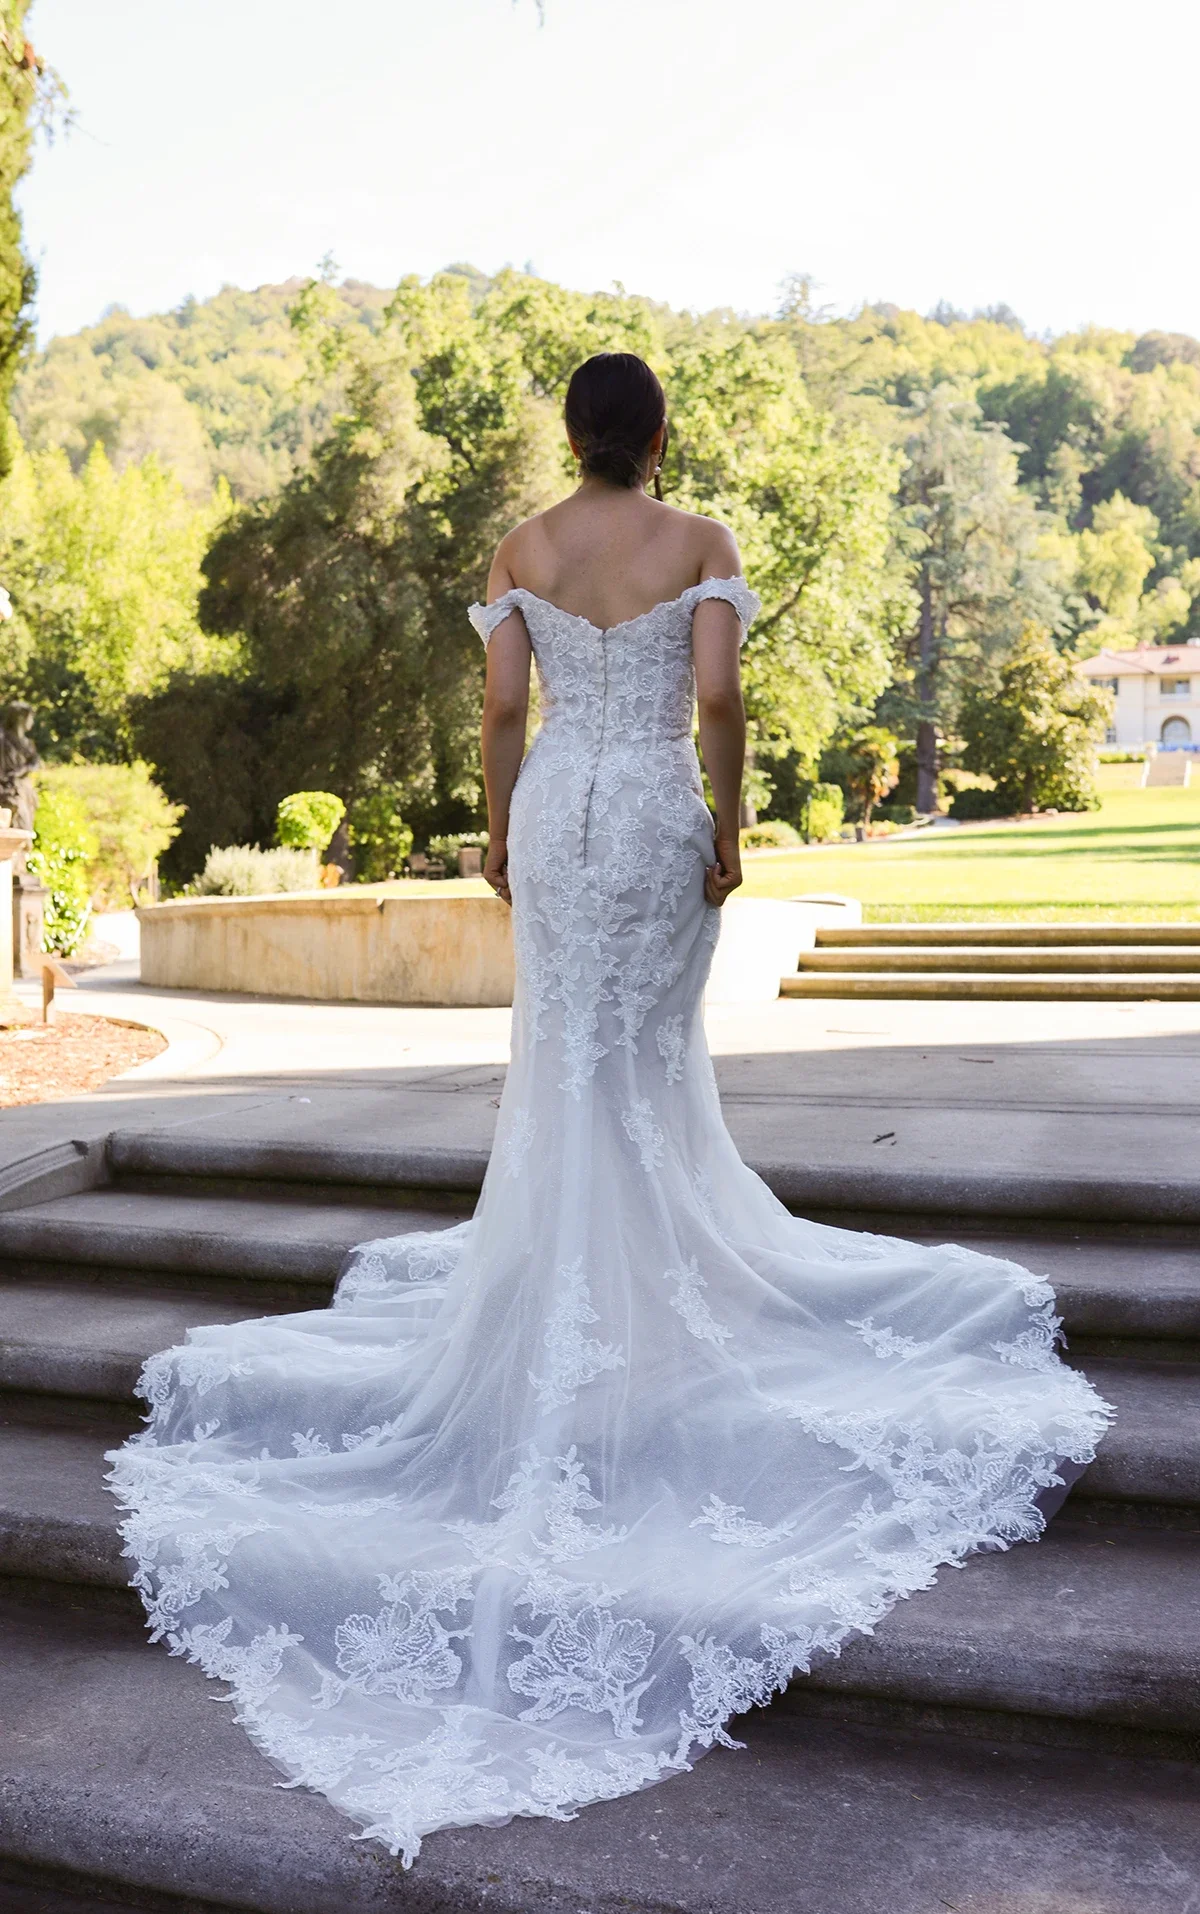 Romantic Off-the-Shoulder Fit-and-Flare Gown by Essense of Australia - Image 2